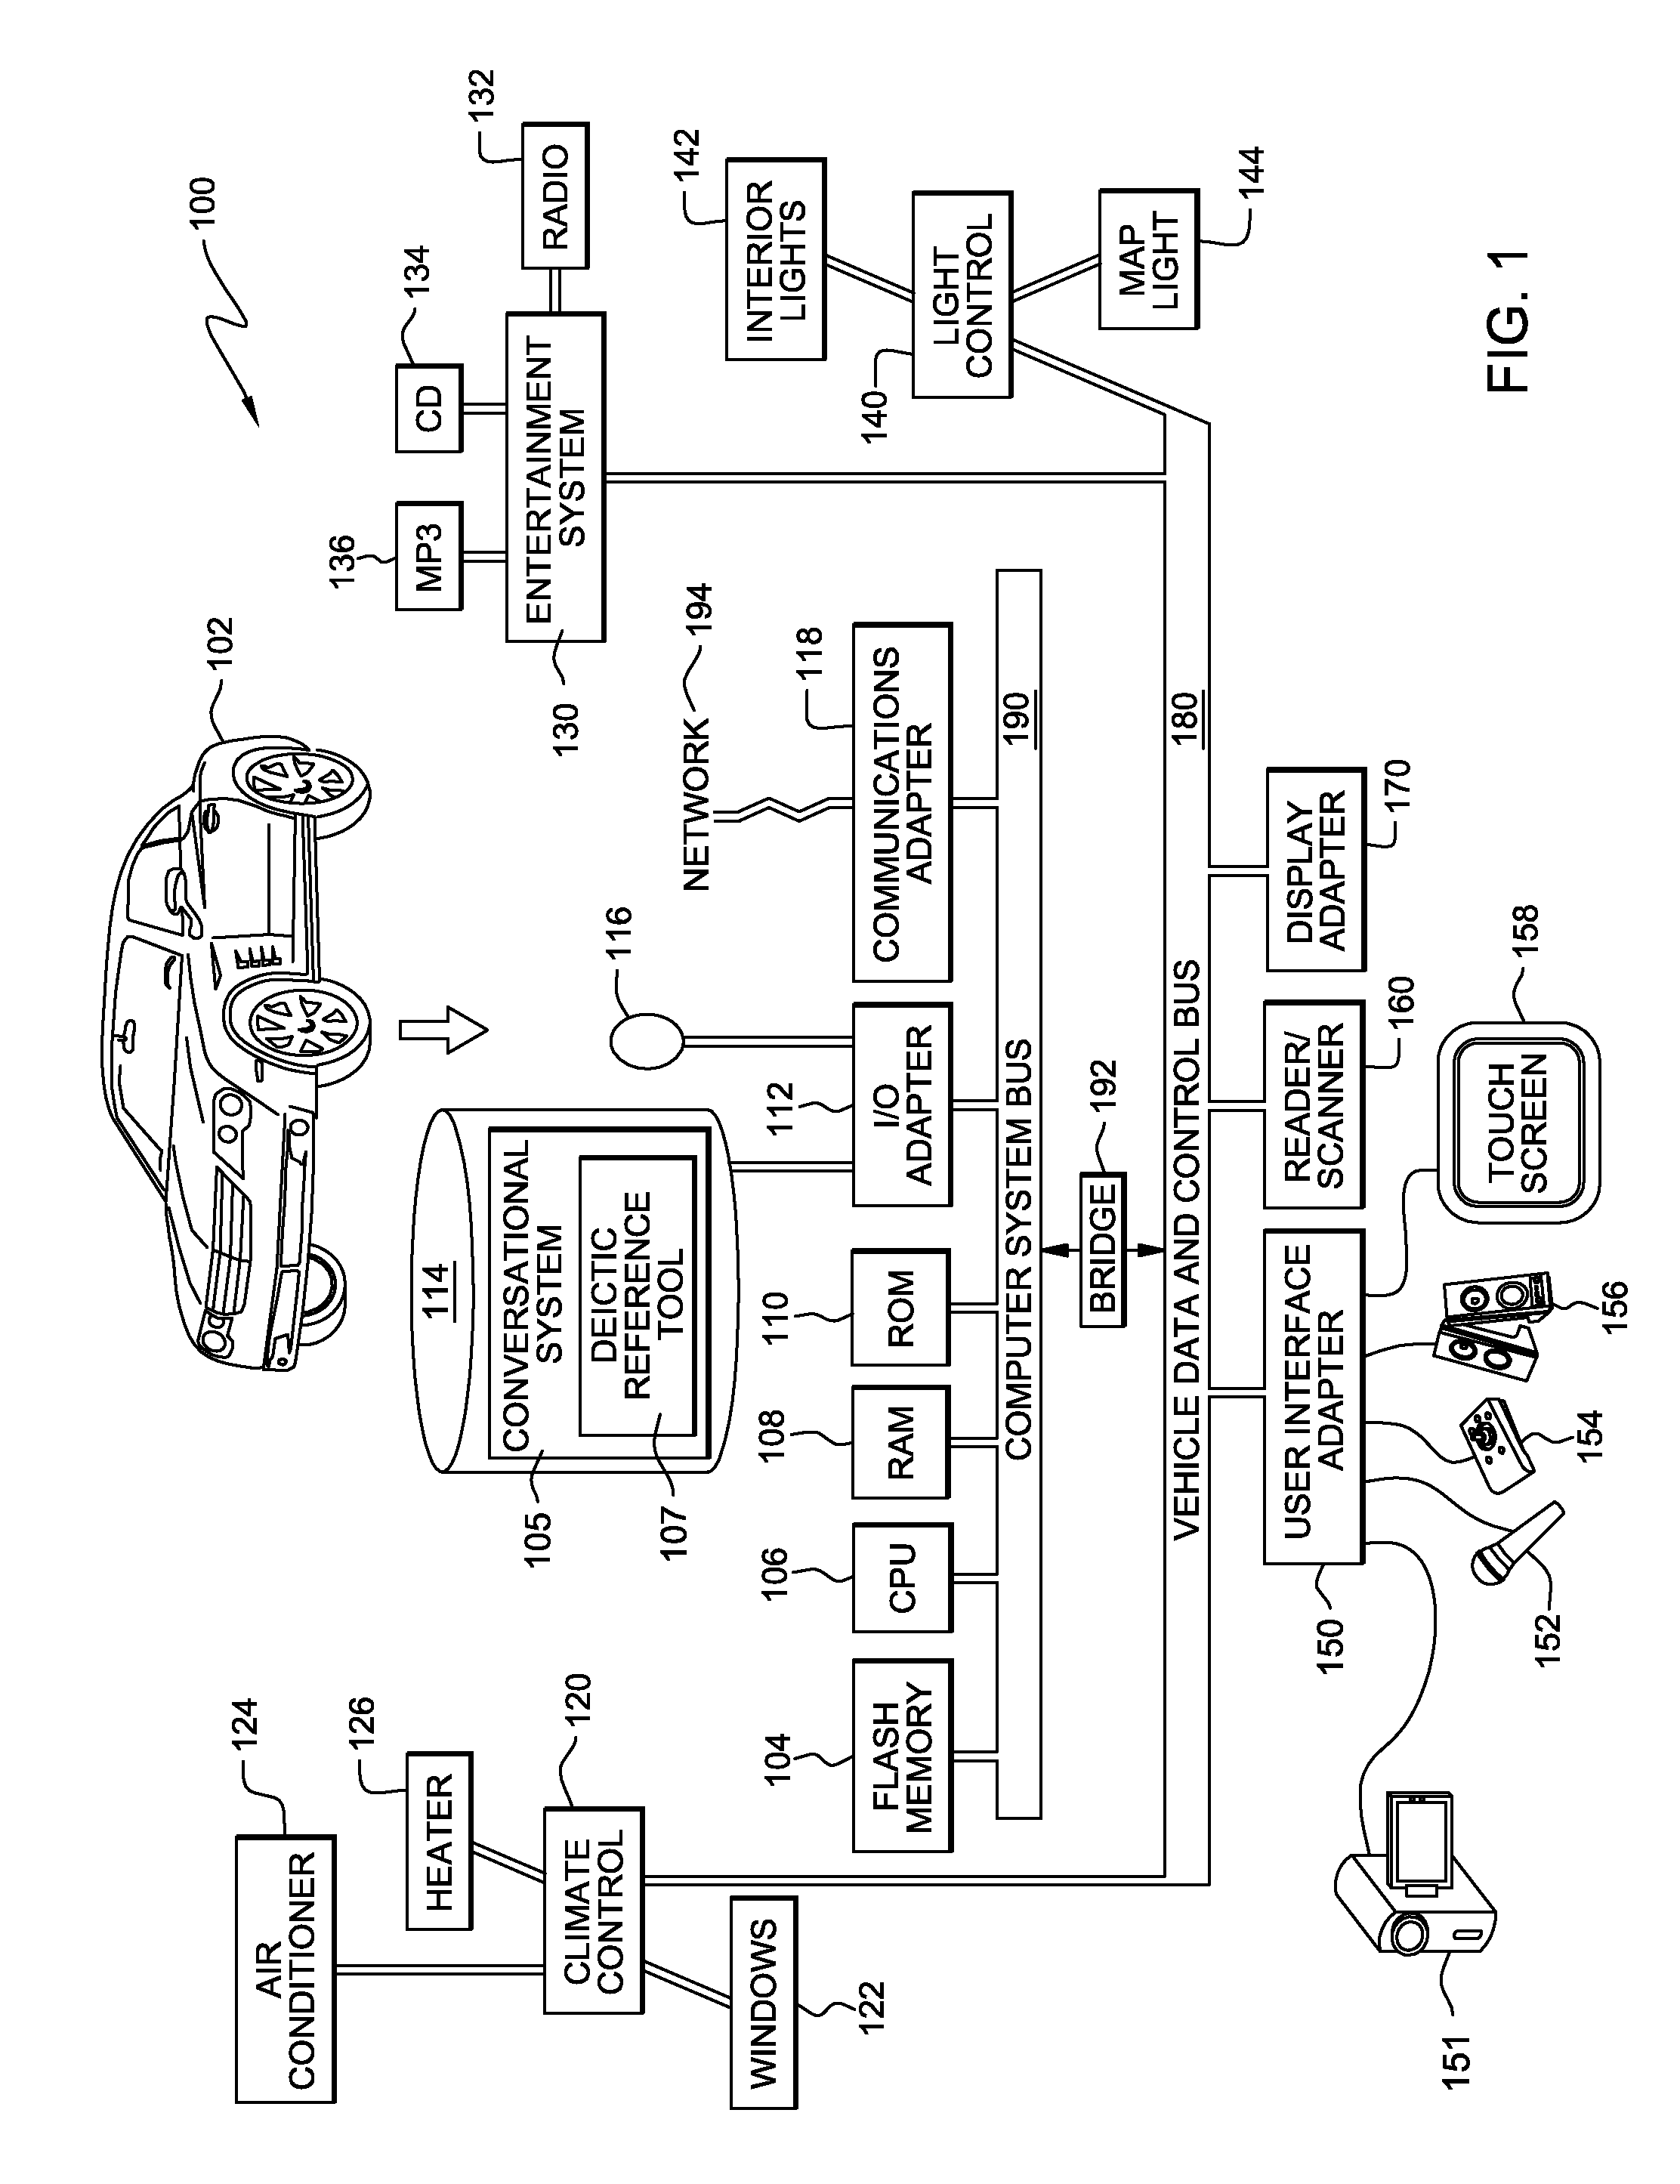 Machine, system and method for user-guided teaching of deictic references and referent objects of deictic references to a conversational command and control system